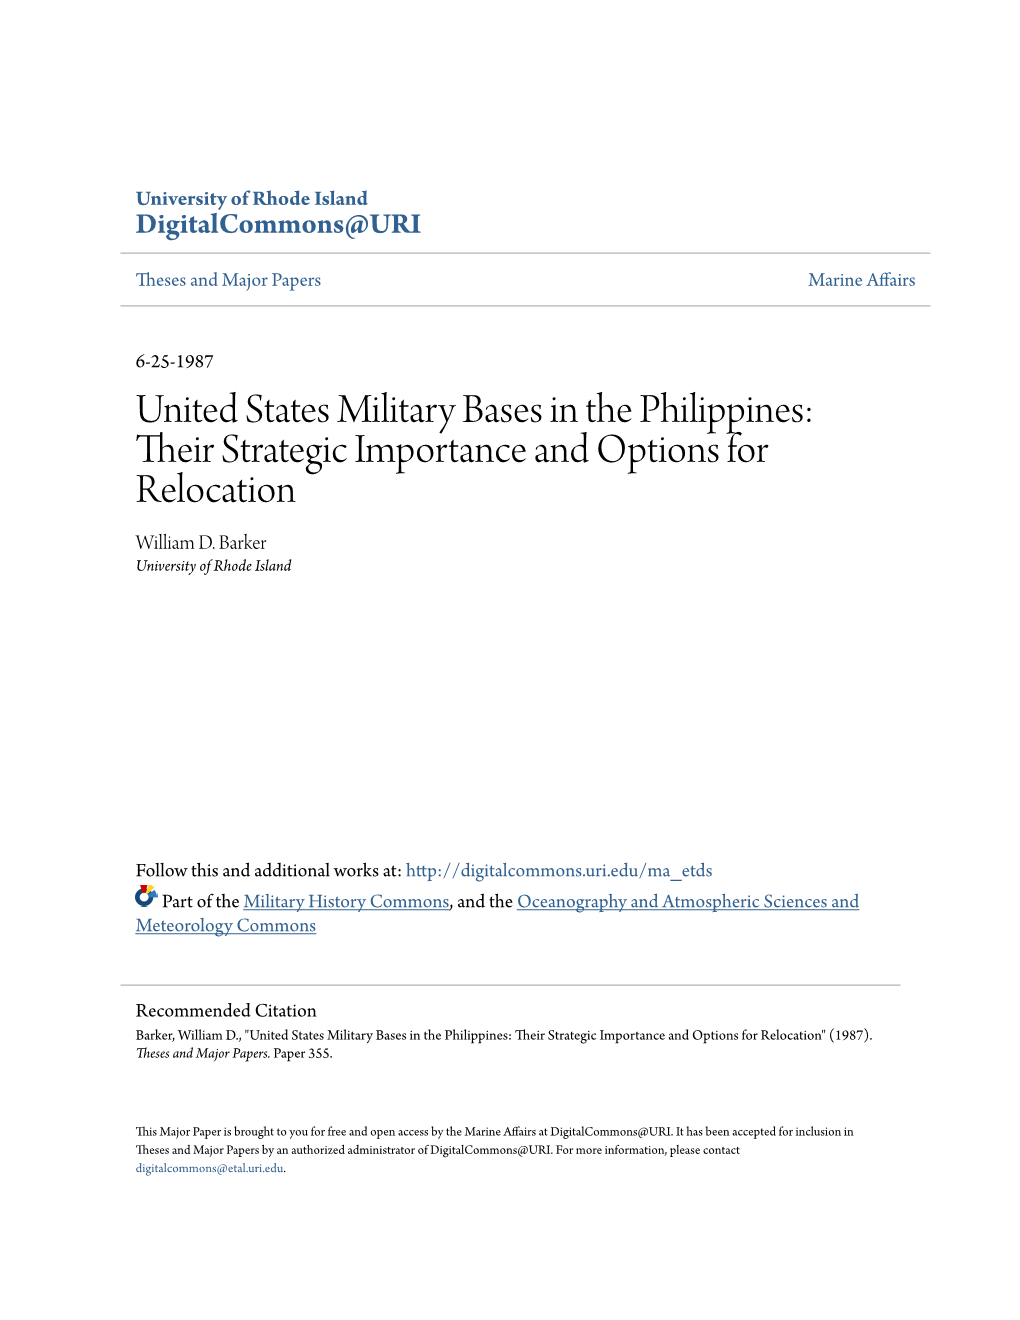 United States Military Bases in the Philippines: Their Trs Ategic Importance and Options for Relocation William D